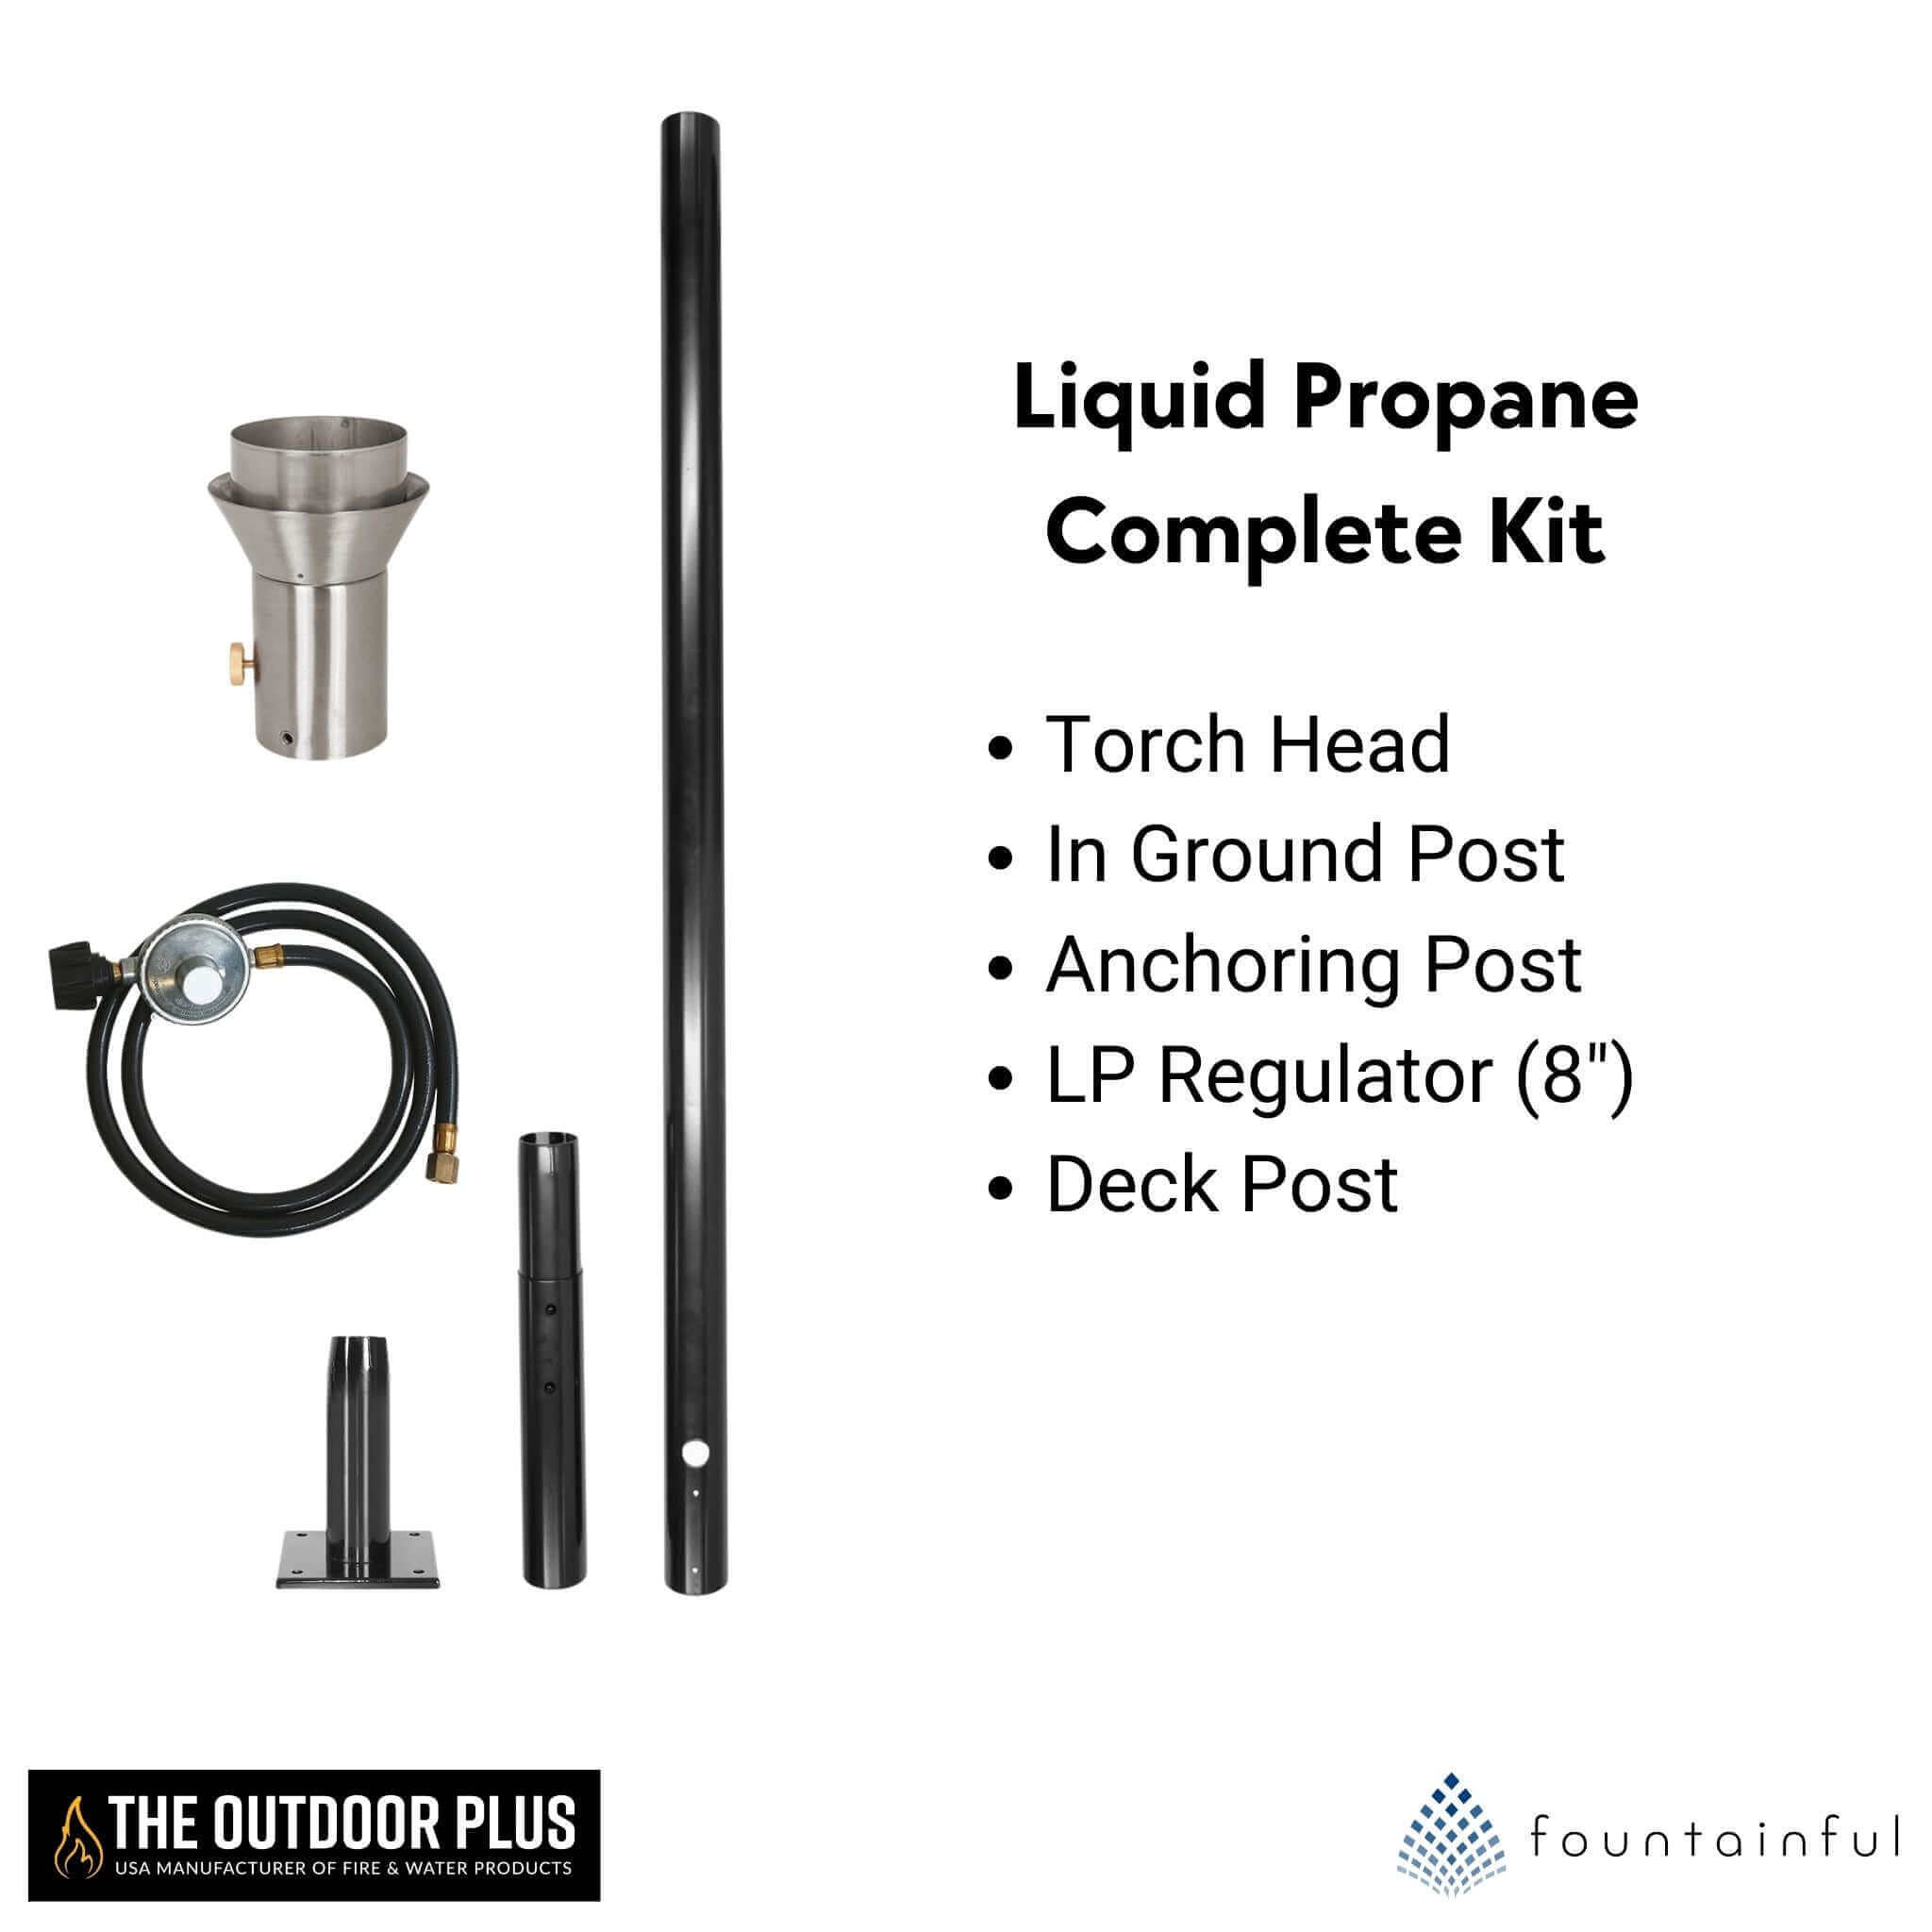 Honeycomb Fire Torch COMPLETE KIT - Stainless Steel - The Outdoor Plus